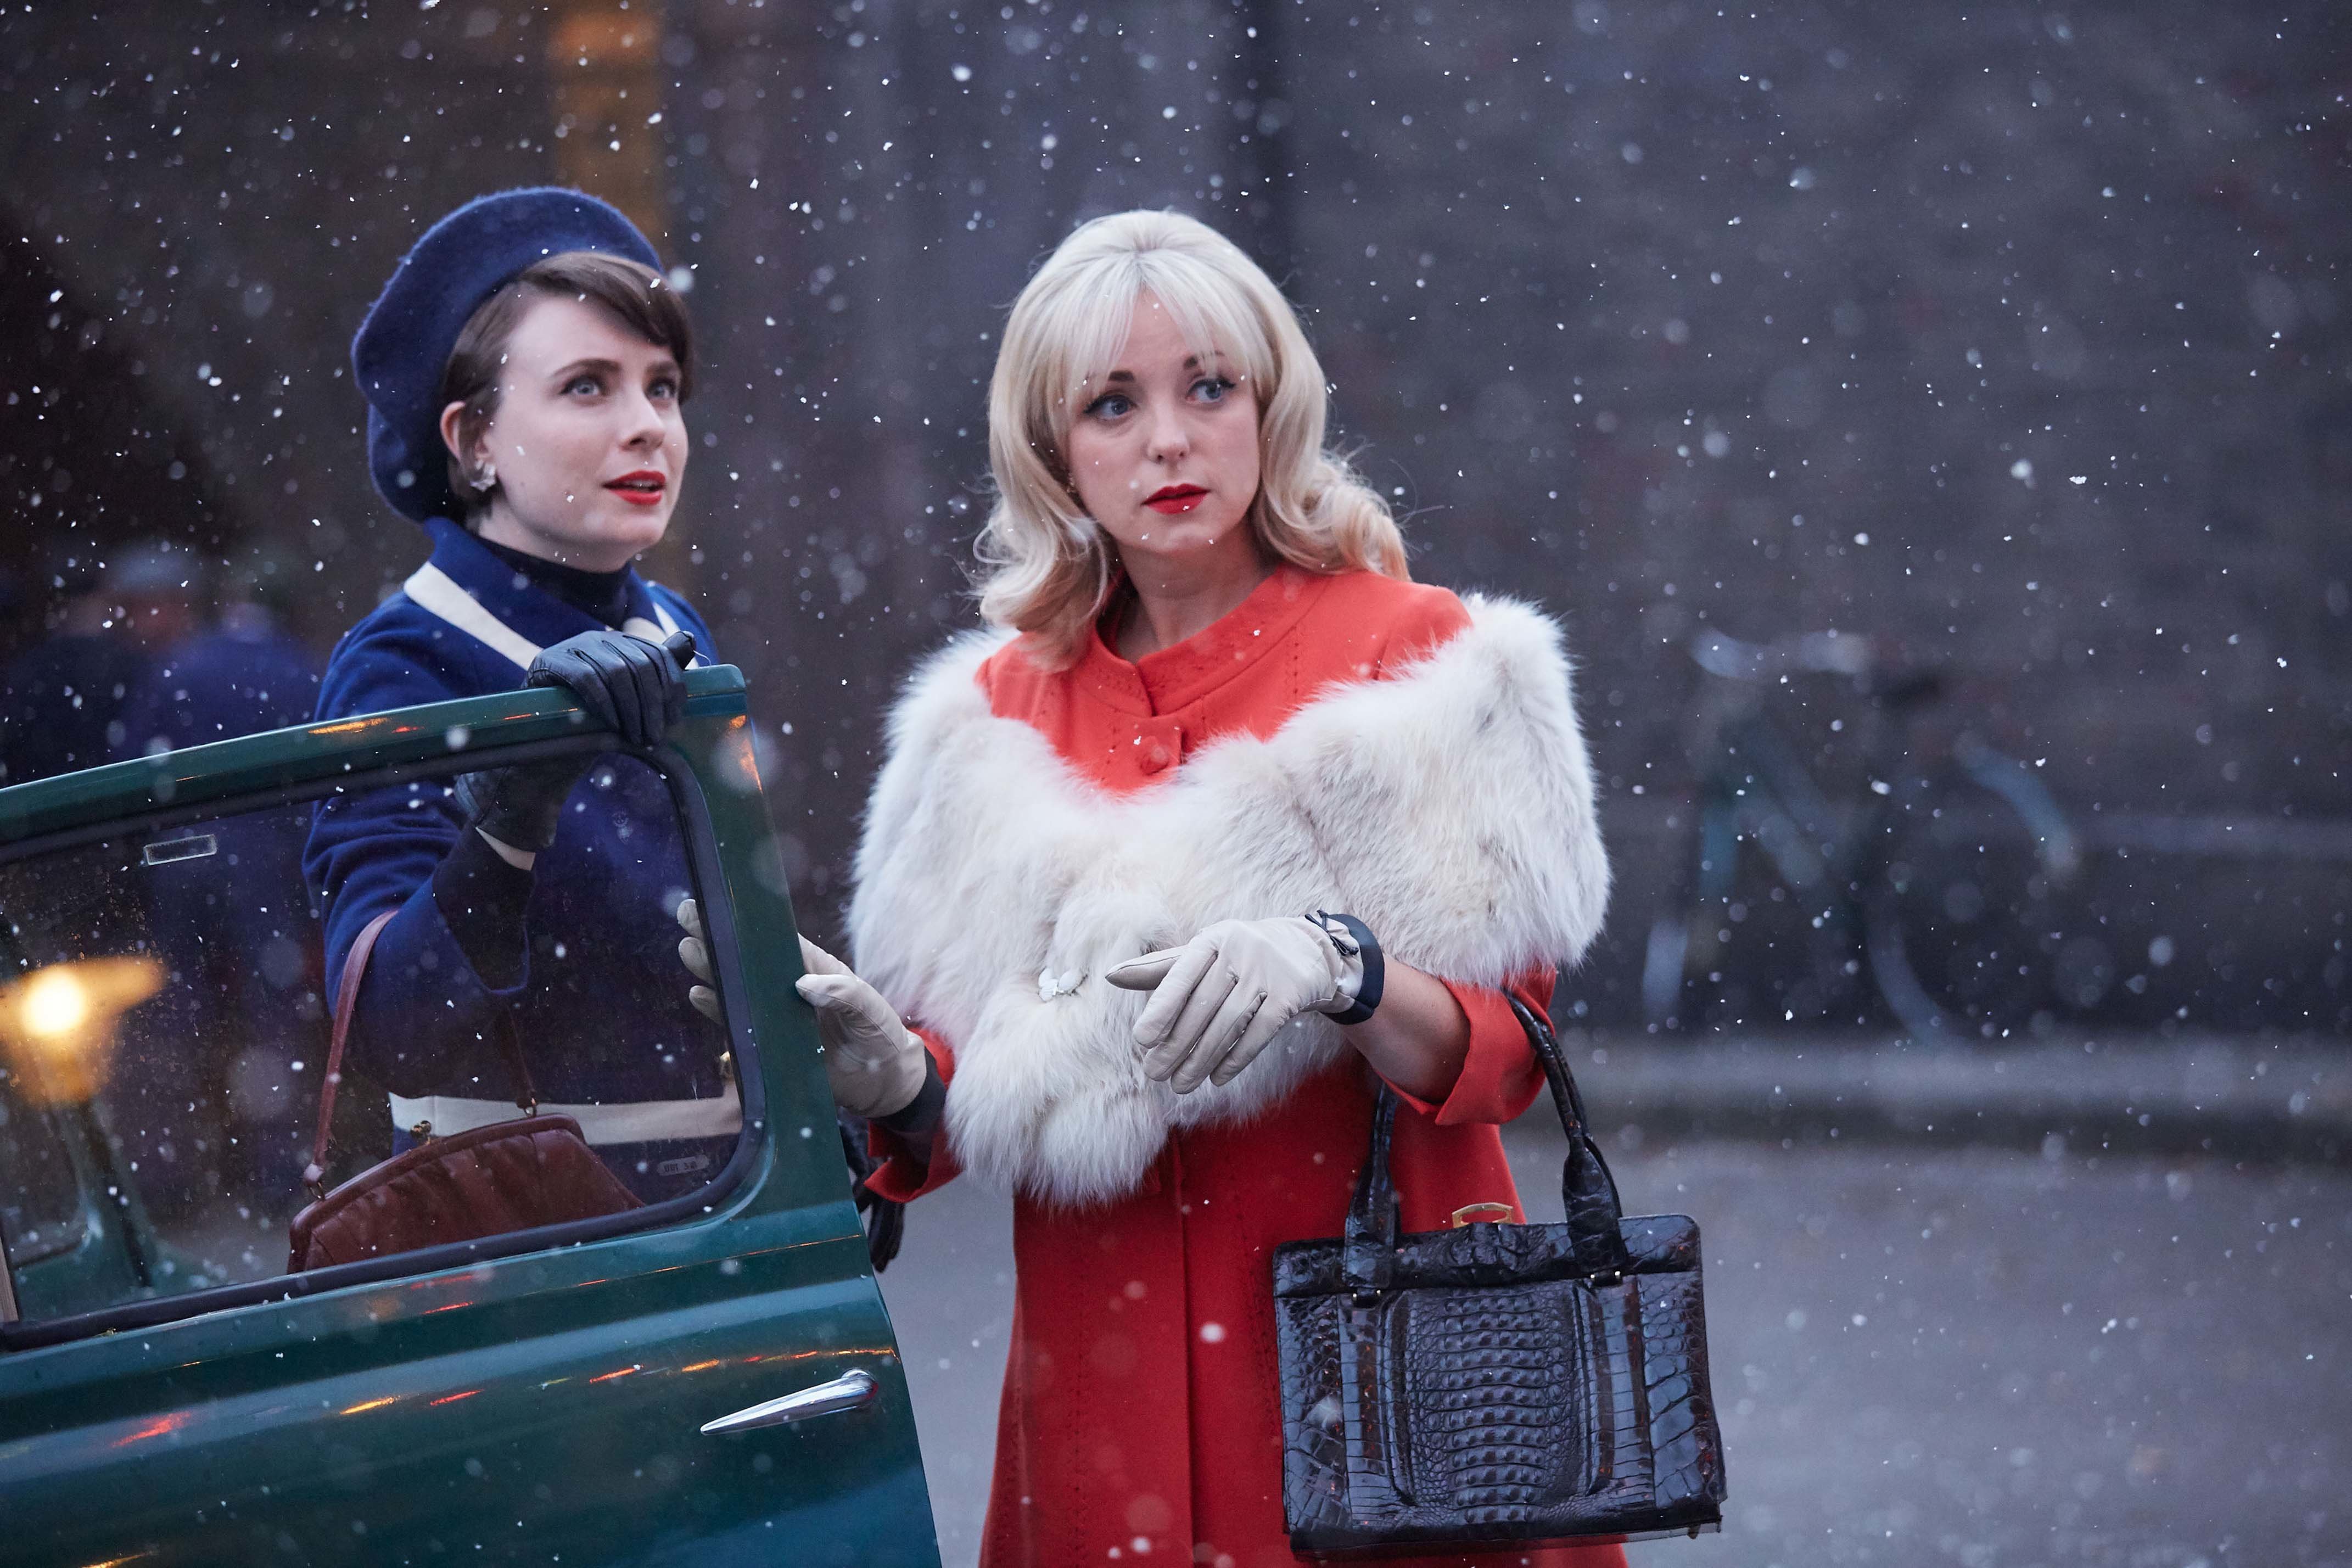 call the midwife christmas special rapidshare premium